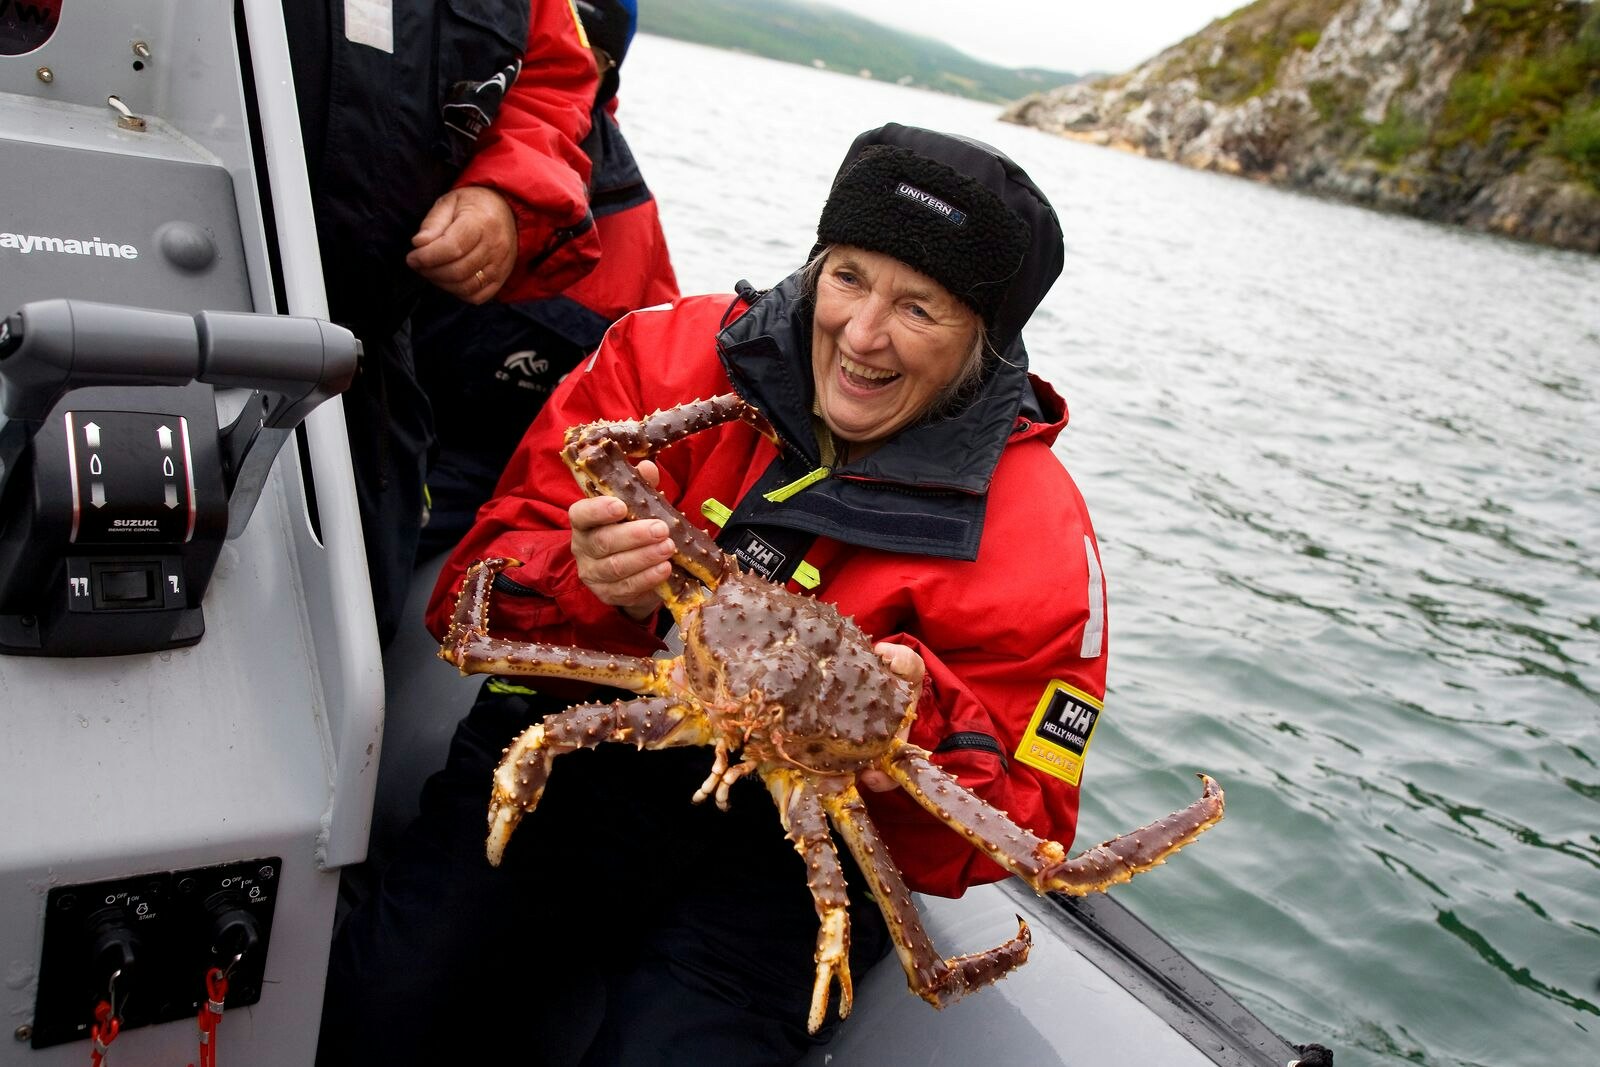 A women in red smiling on a boat holding up a large king crab